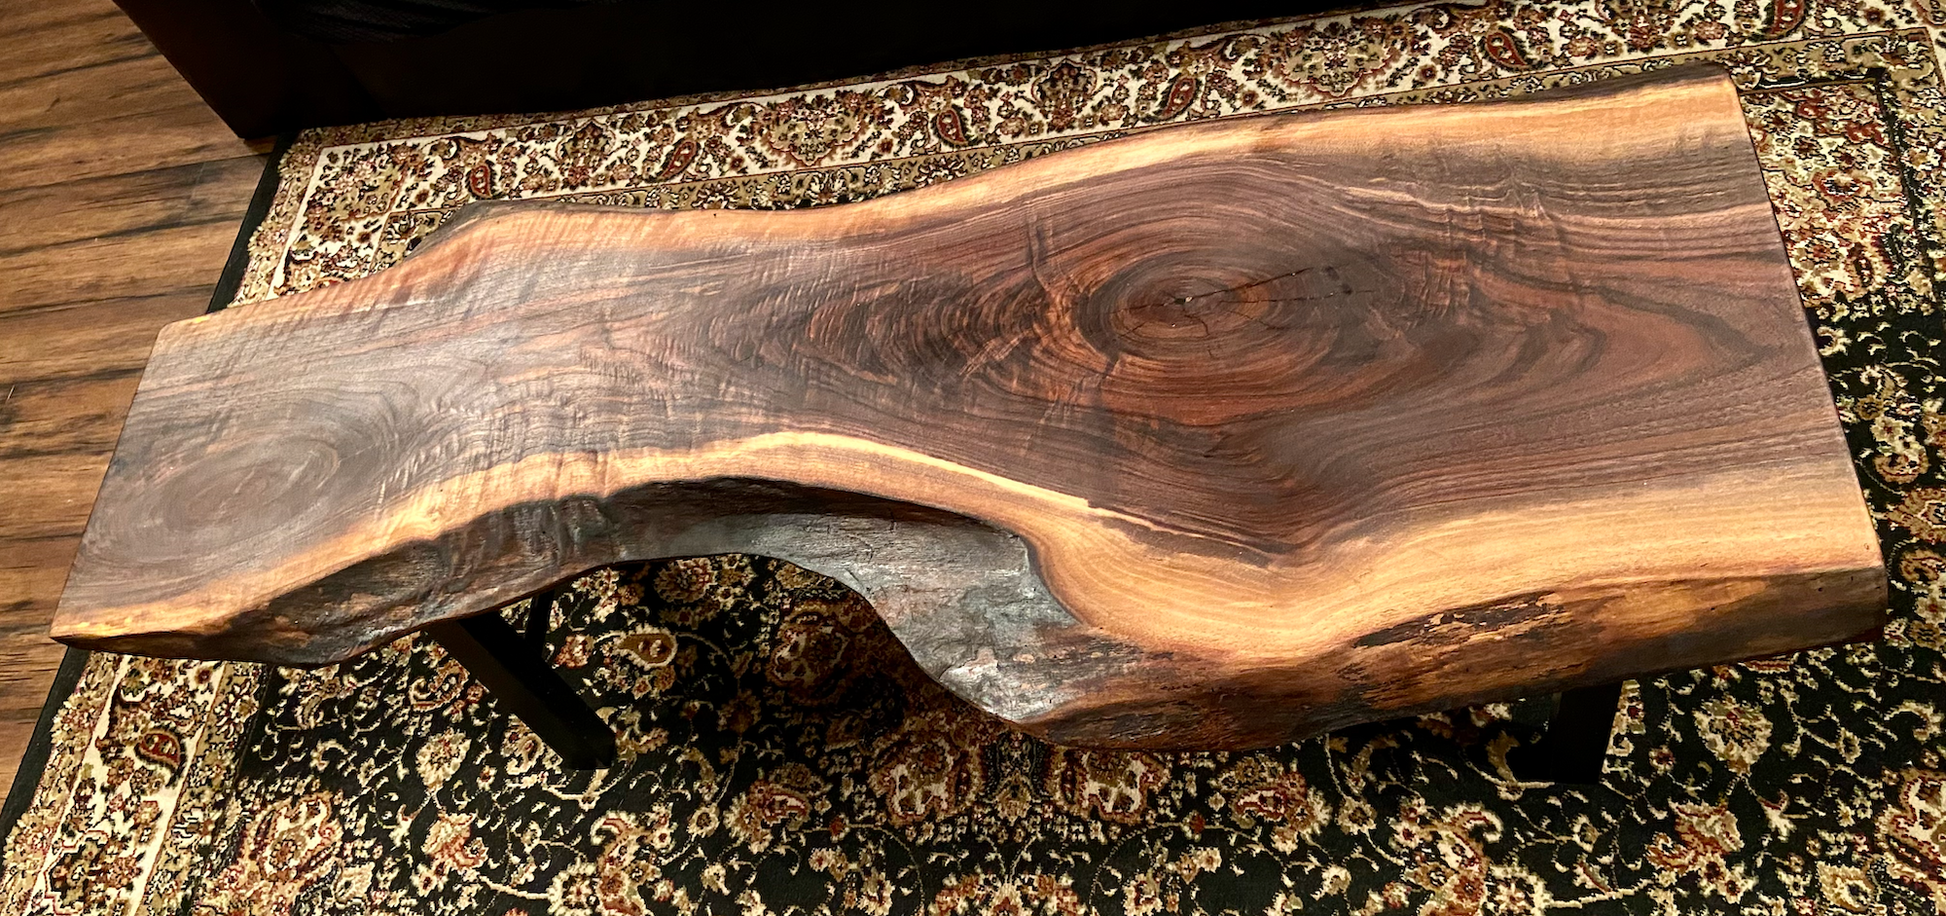 Gorgeously Patterned & Uniquely Shaped Live Edge Walnut Coffee Table|Live Edge Media Console Table | Rustic Live Edge Wood Display Table